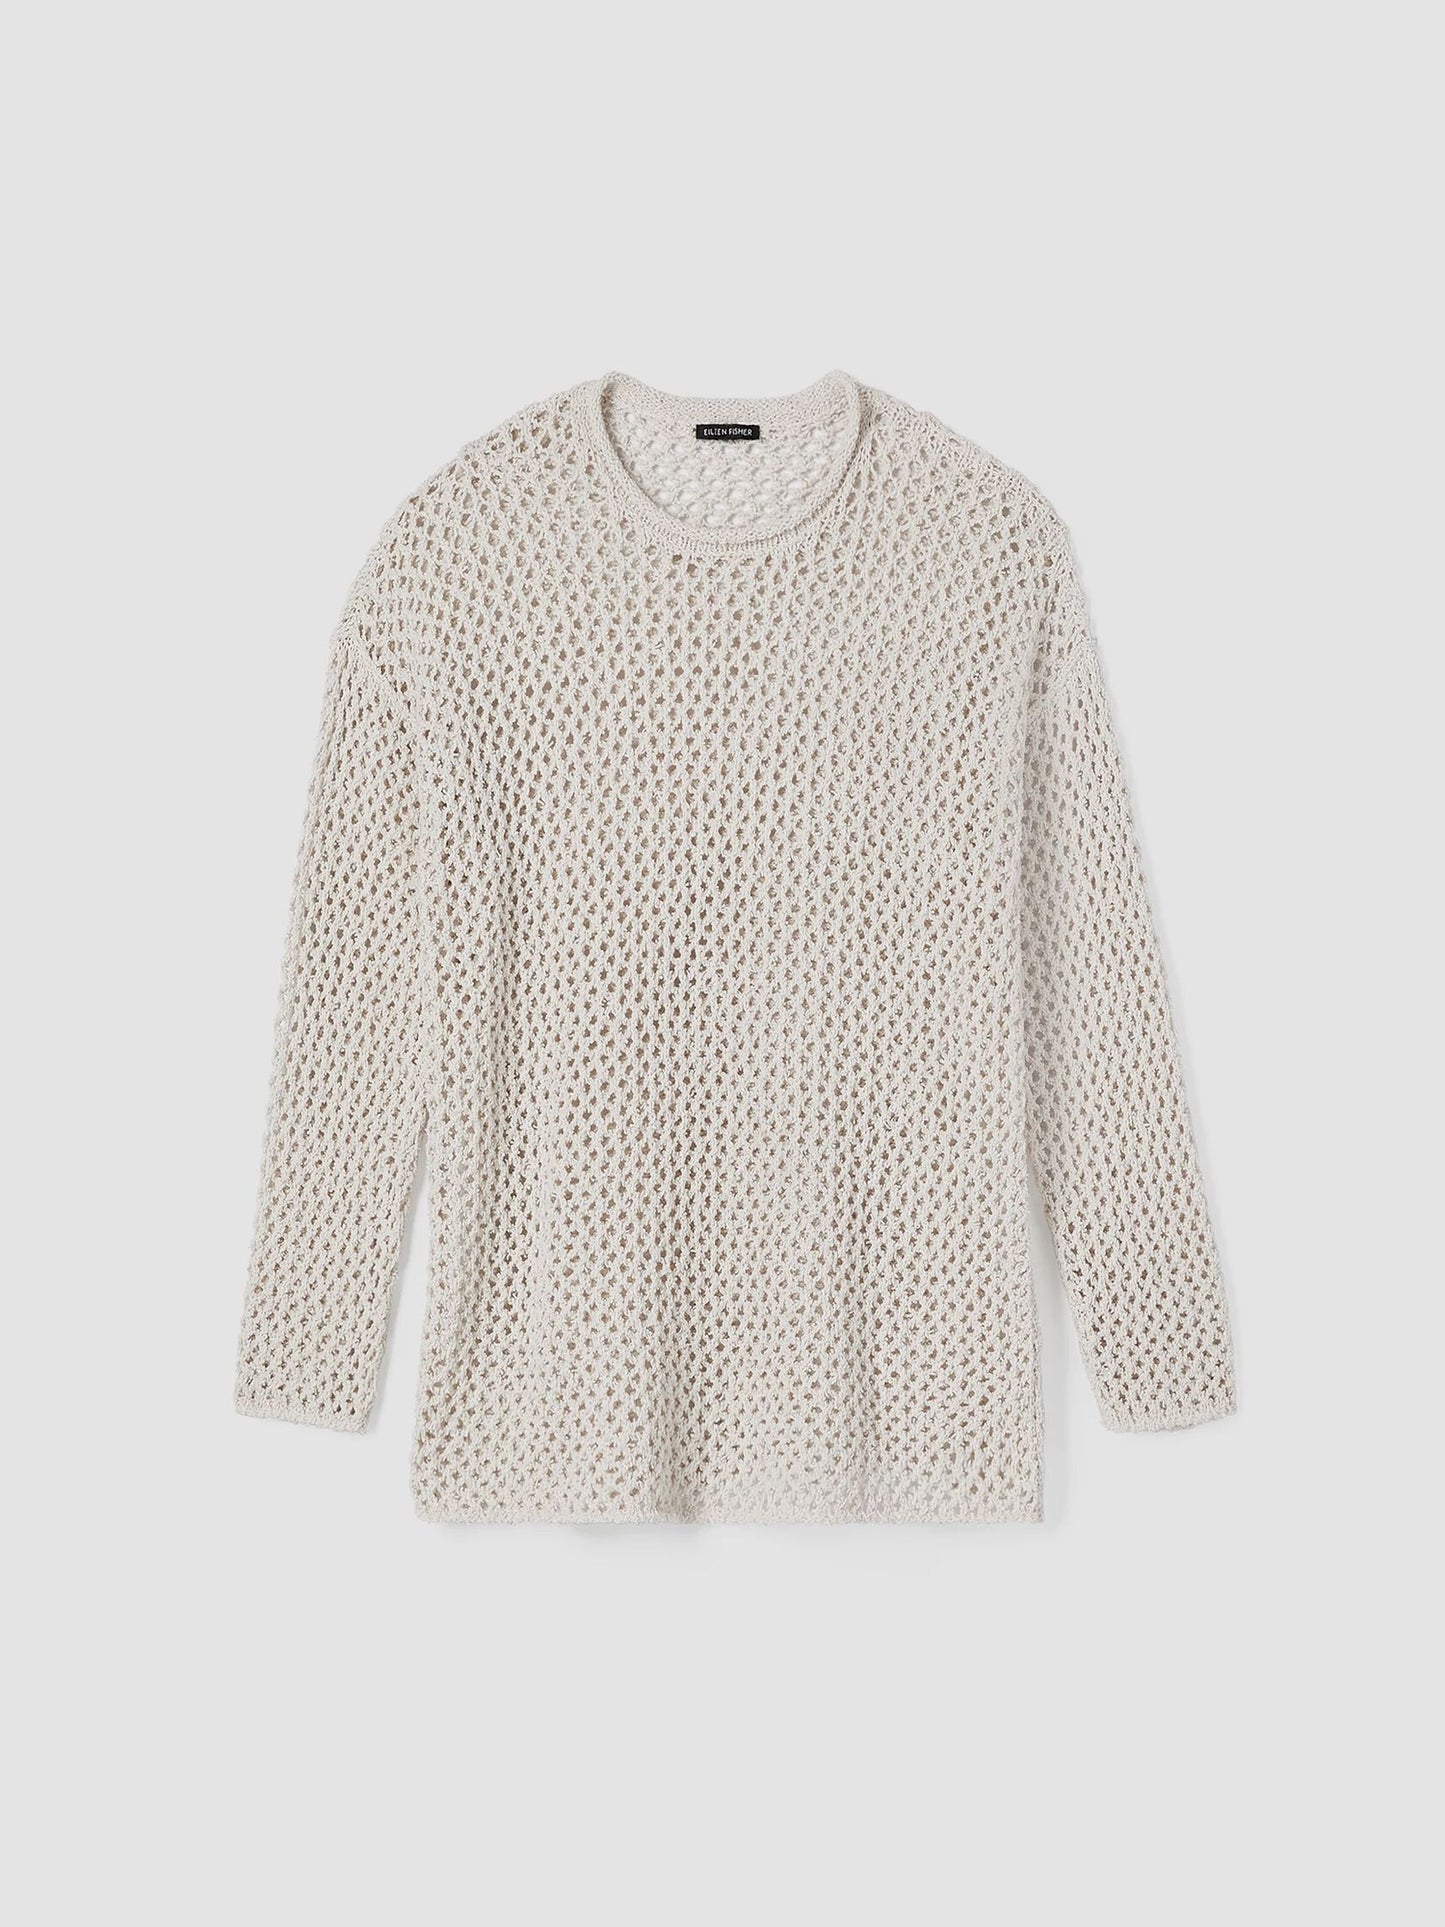 Eileen Fisher Organic Cotton Boucle Crew Neck Top